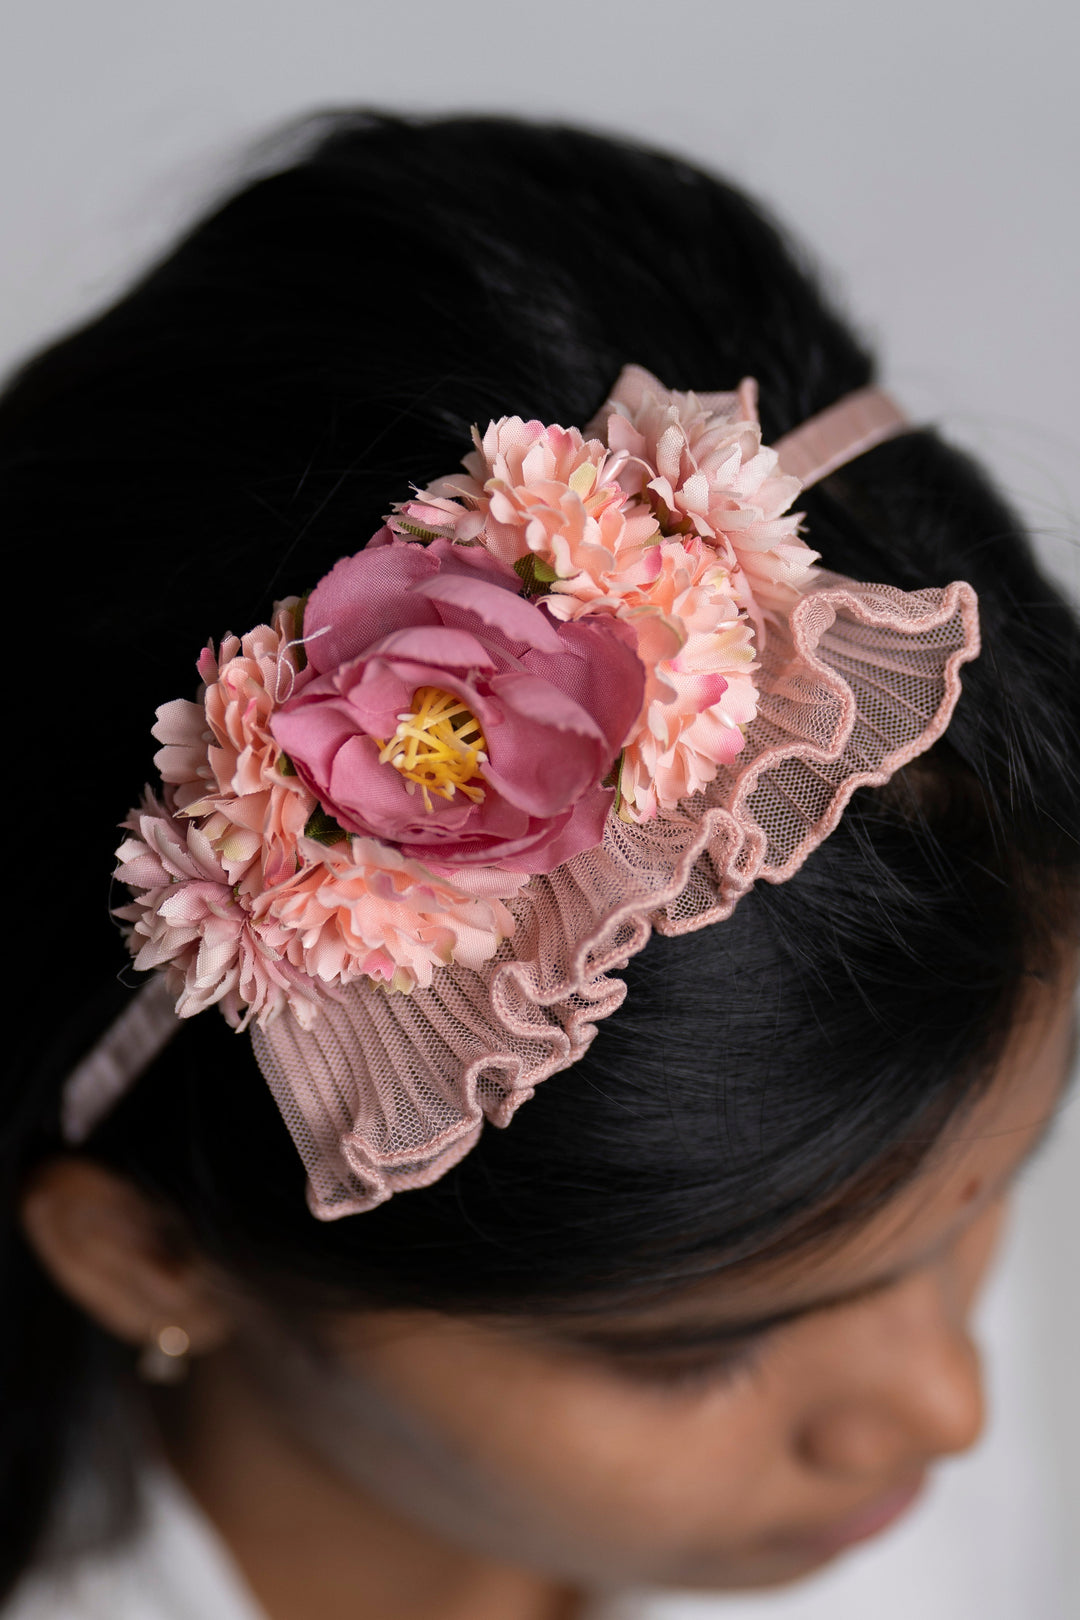 The Nesavu Hair Band Chic Coral Blossom Hairband with Ruffled Lace Detail Nesavu Pink JHB81C Floral Coral Hairband with Lace | Stylish Spring Accessory for All Ages | The Nesavu